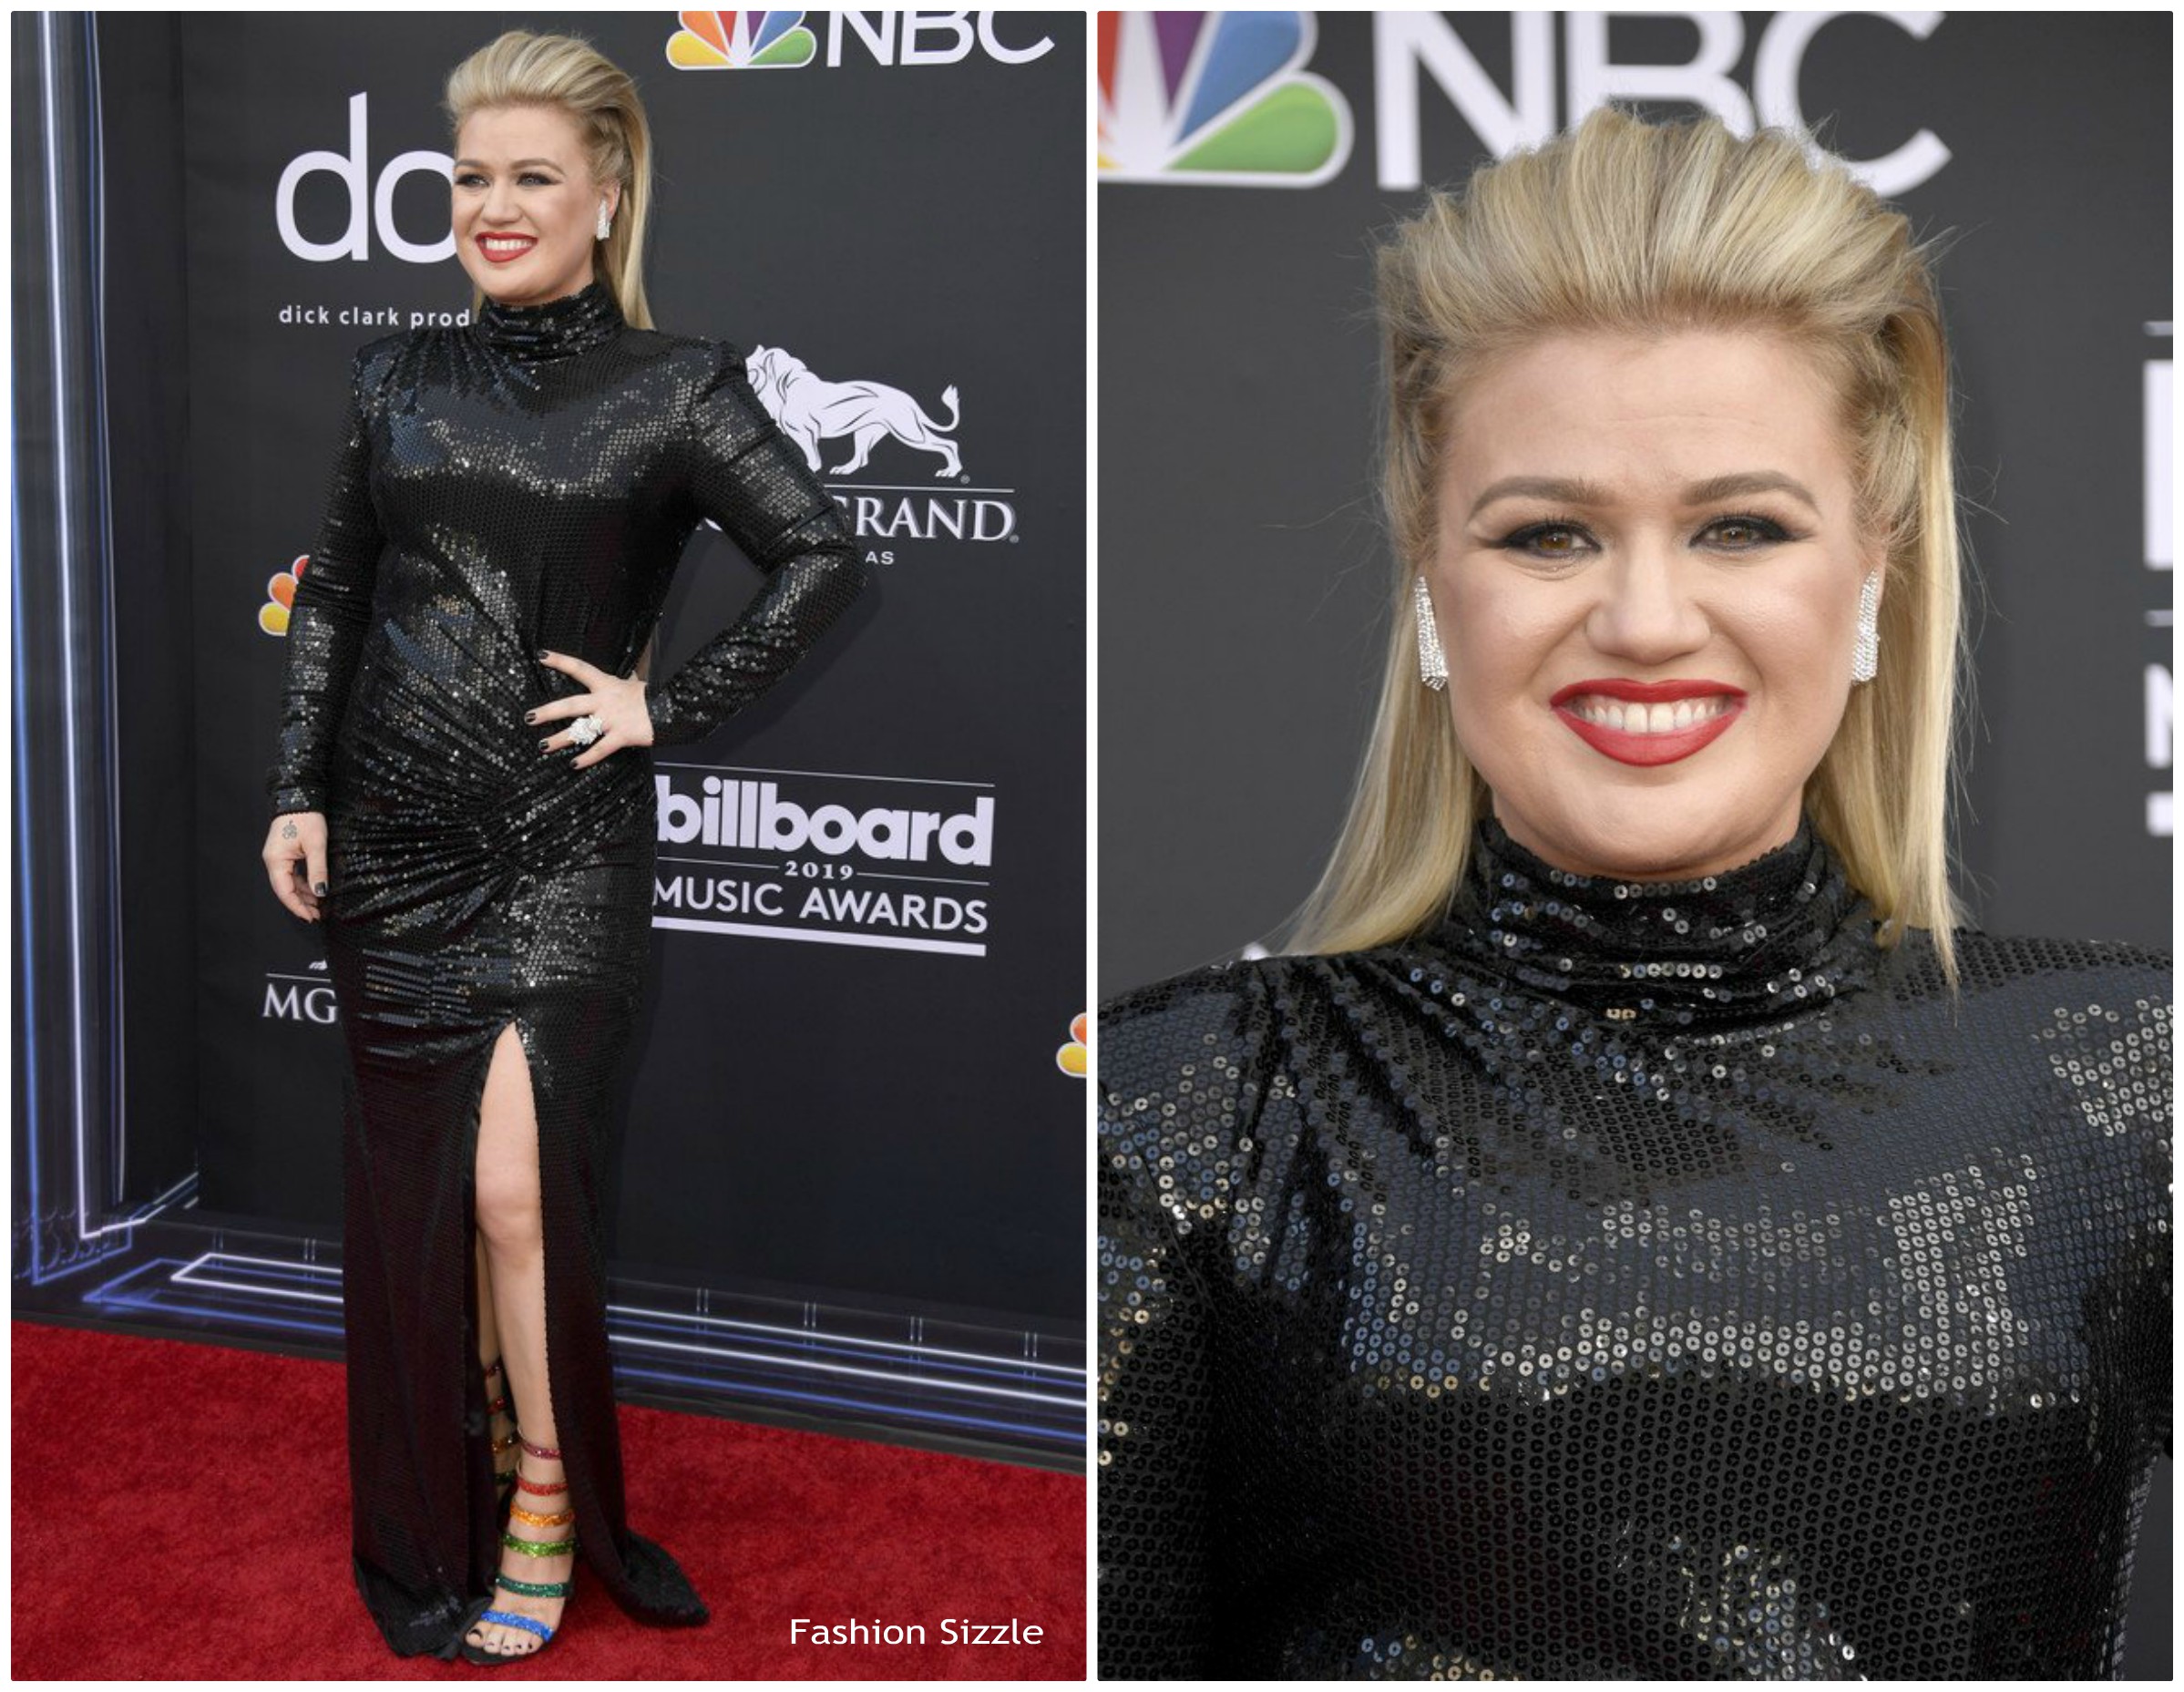 kelly-clarkson-in-the-mood-for-love-2019-billboard-music-awards